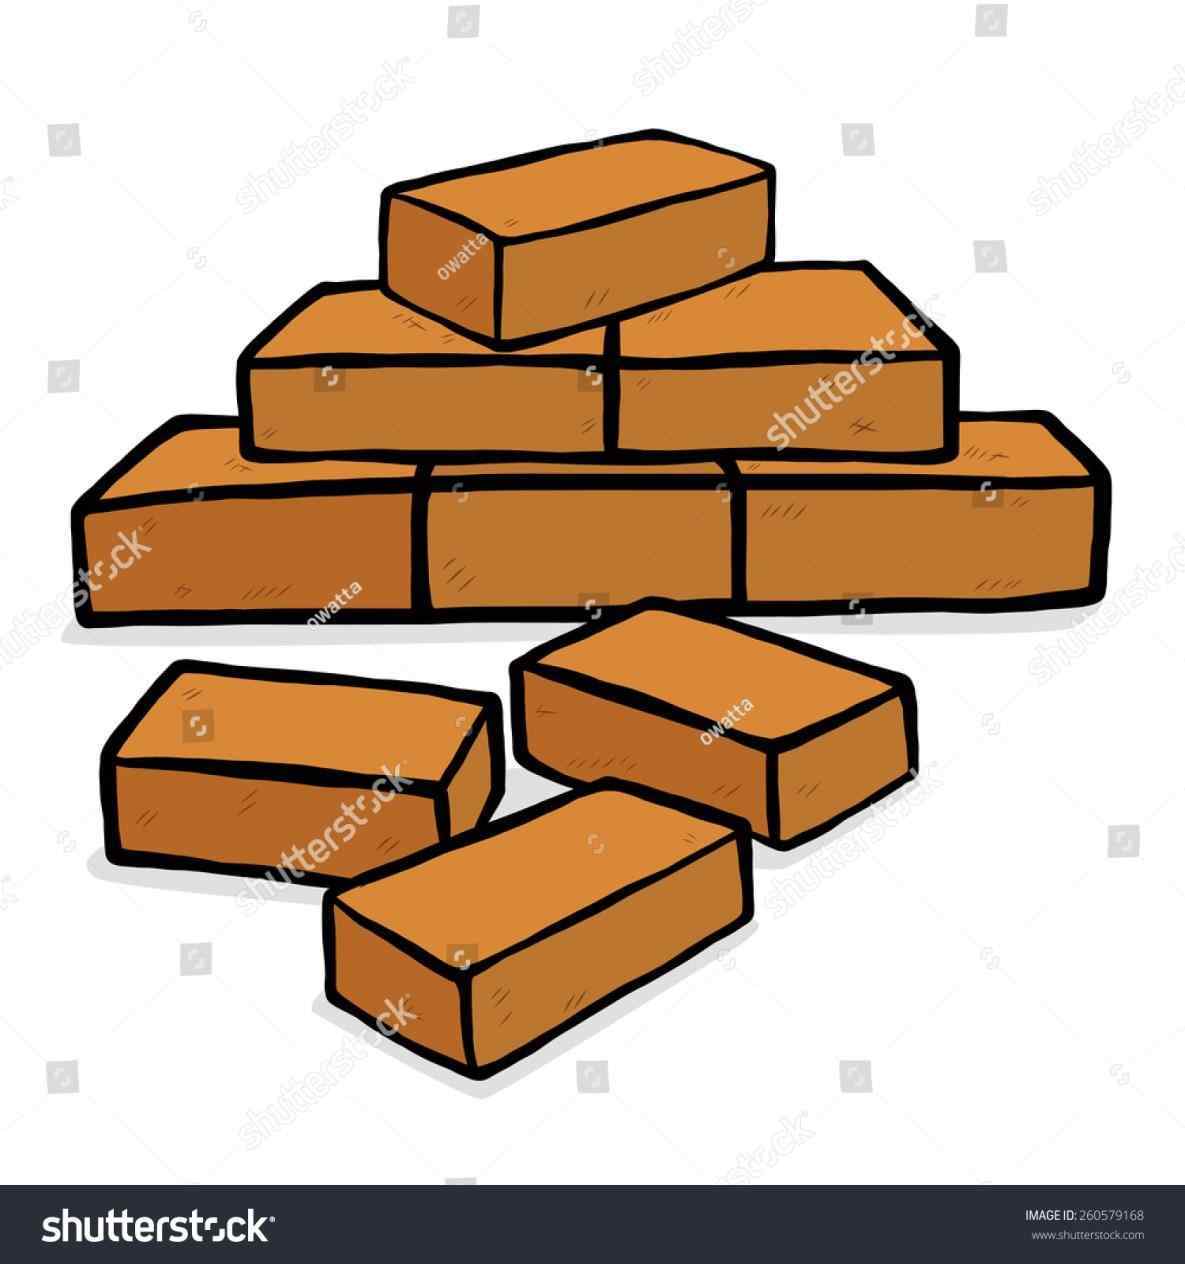 Pencil and in color pictures of pictures pile of bricks clipart of brick  clipart bruck clipground